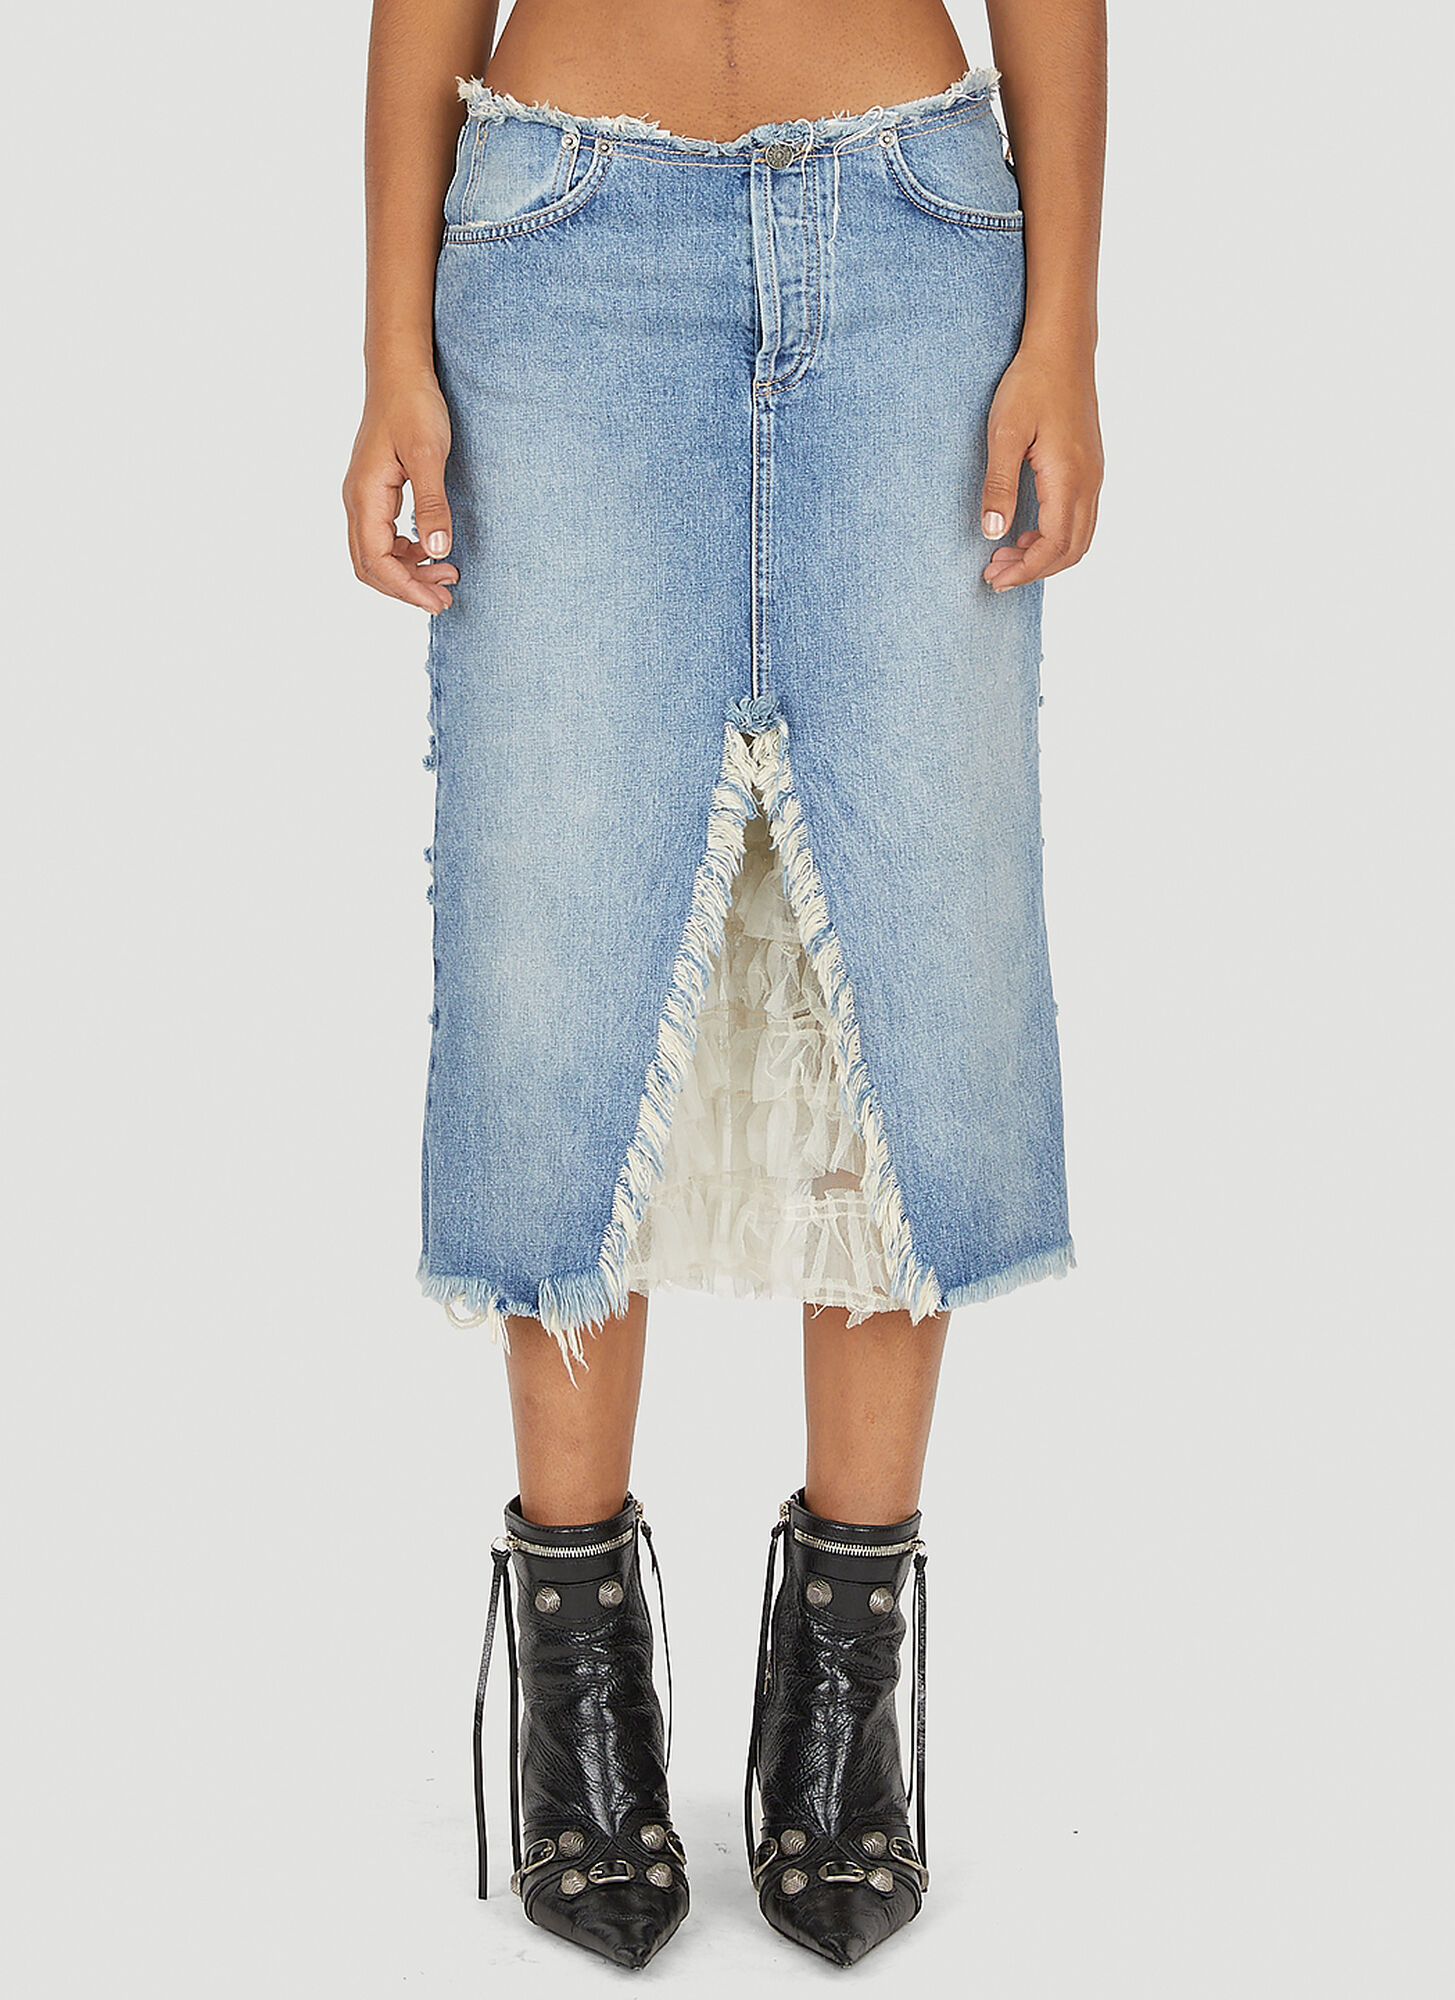 Guess Usa Distressed Denim Skirt In Blue